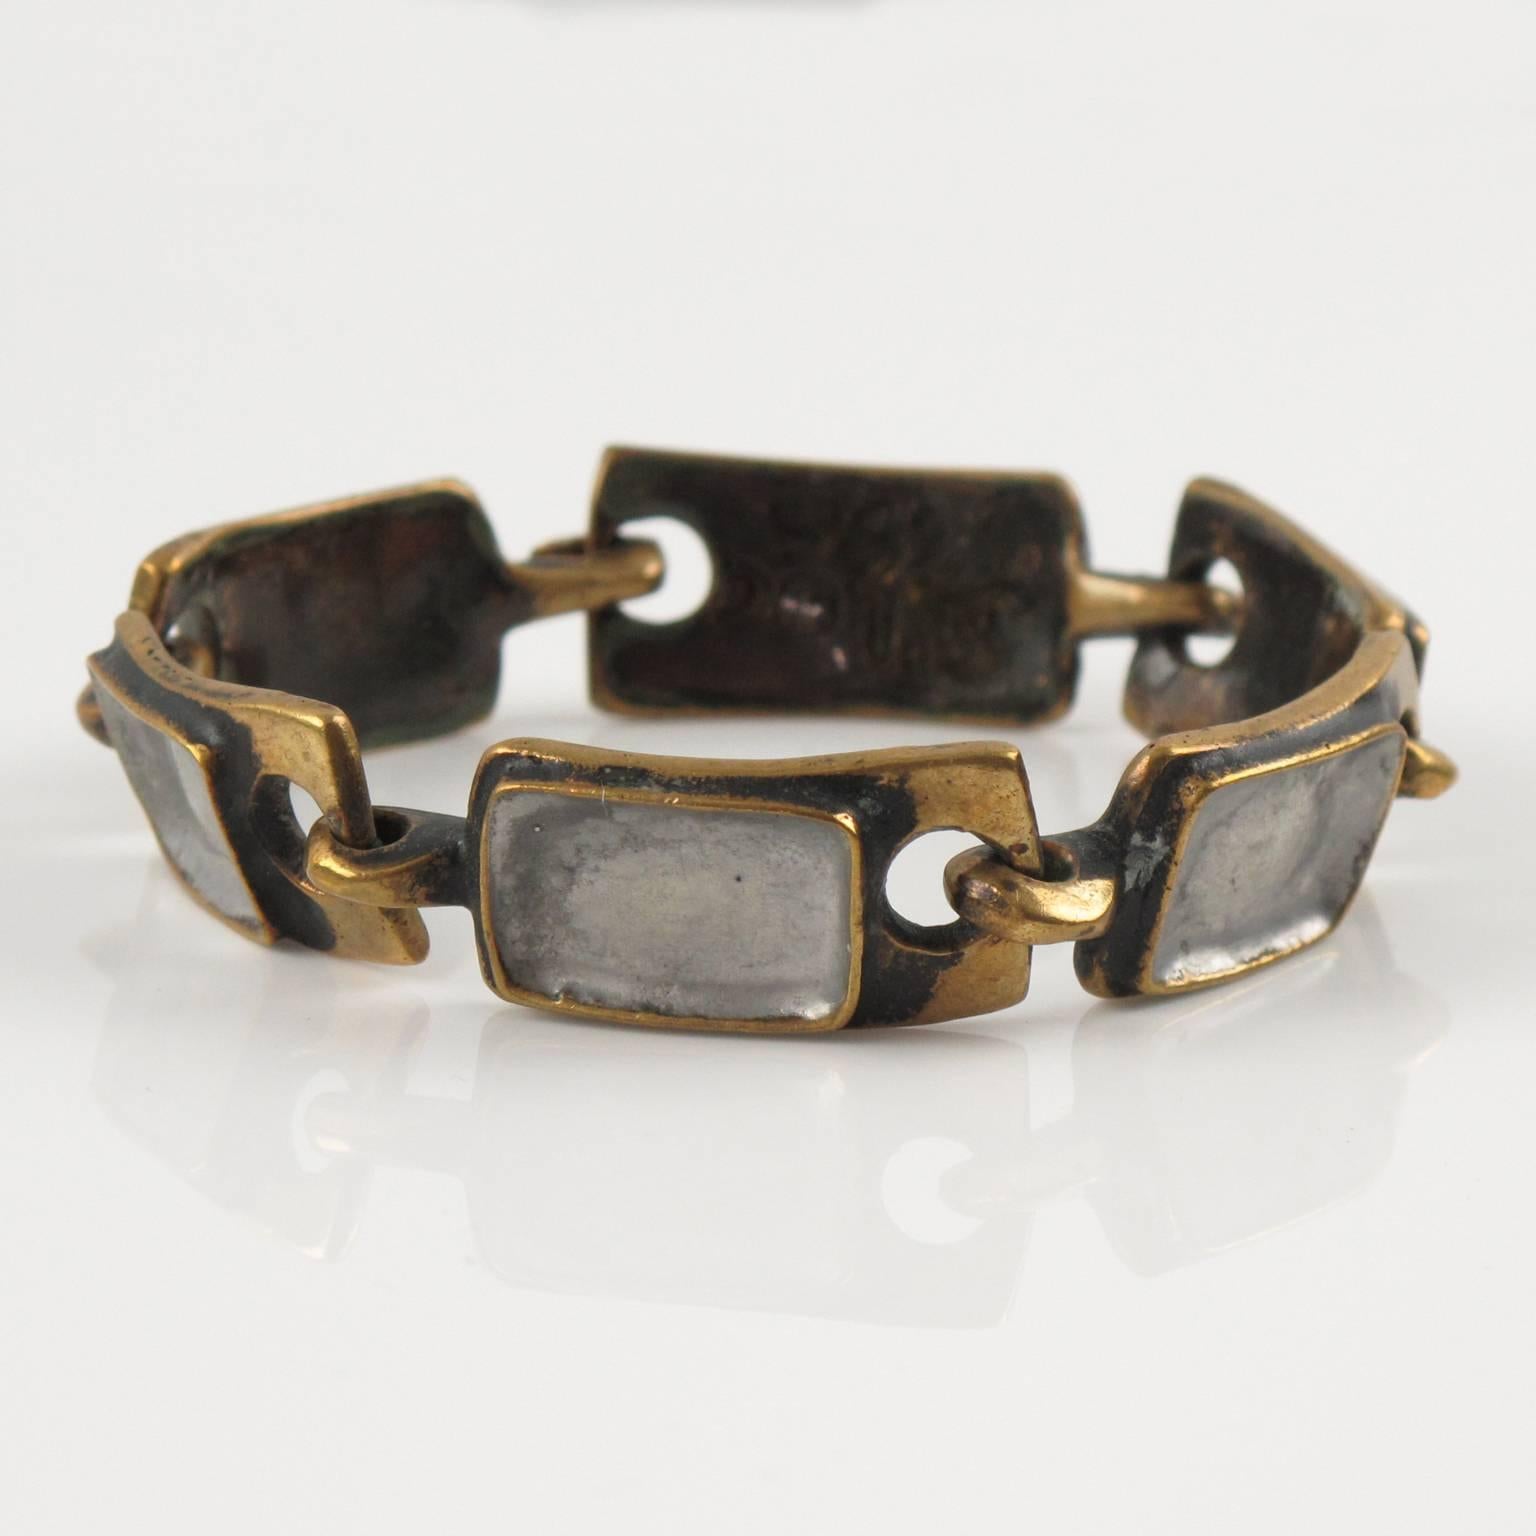 Rare modernist bronze and enamel link bracelet by French designer St Luc. Geometric gilded bronze metal carved elements topped with silver enameling. Hook closing clasp. Signed underside: 